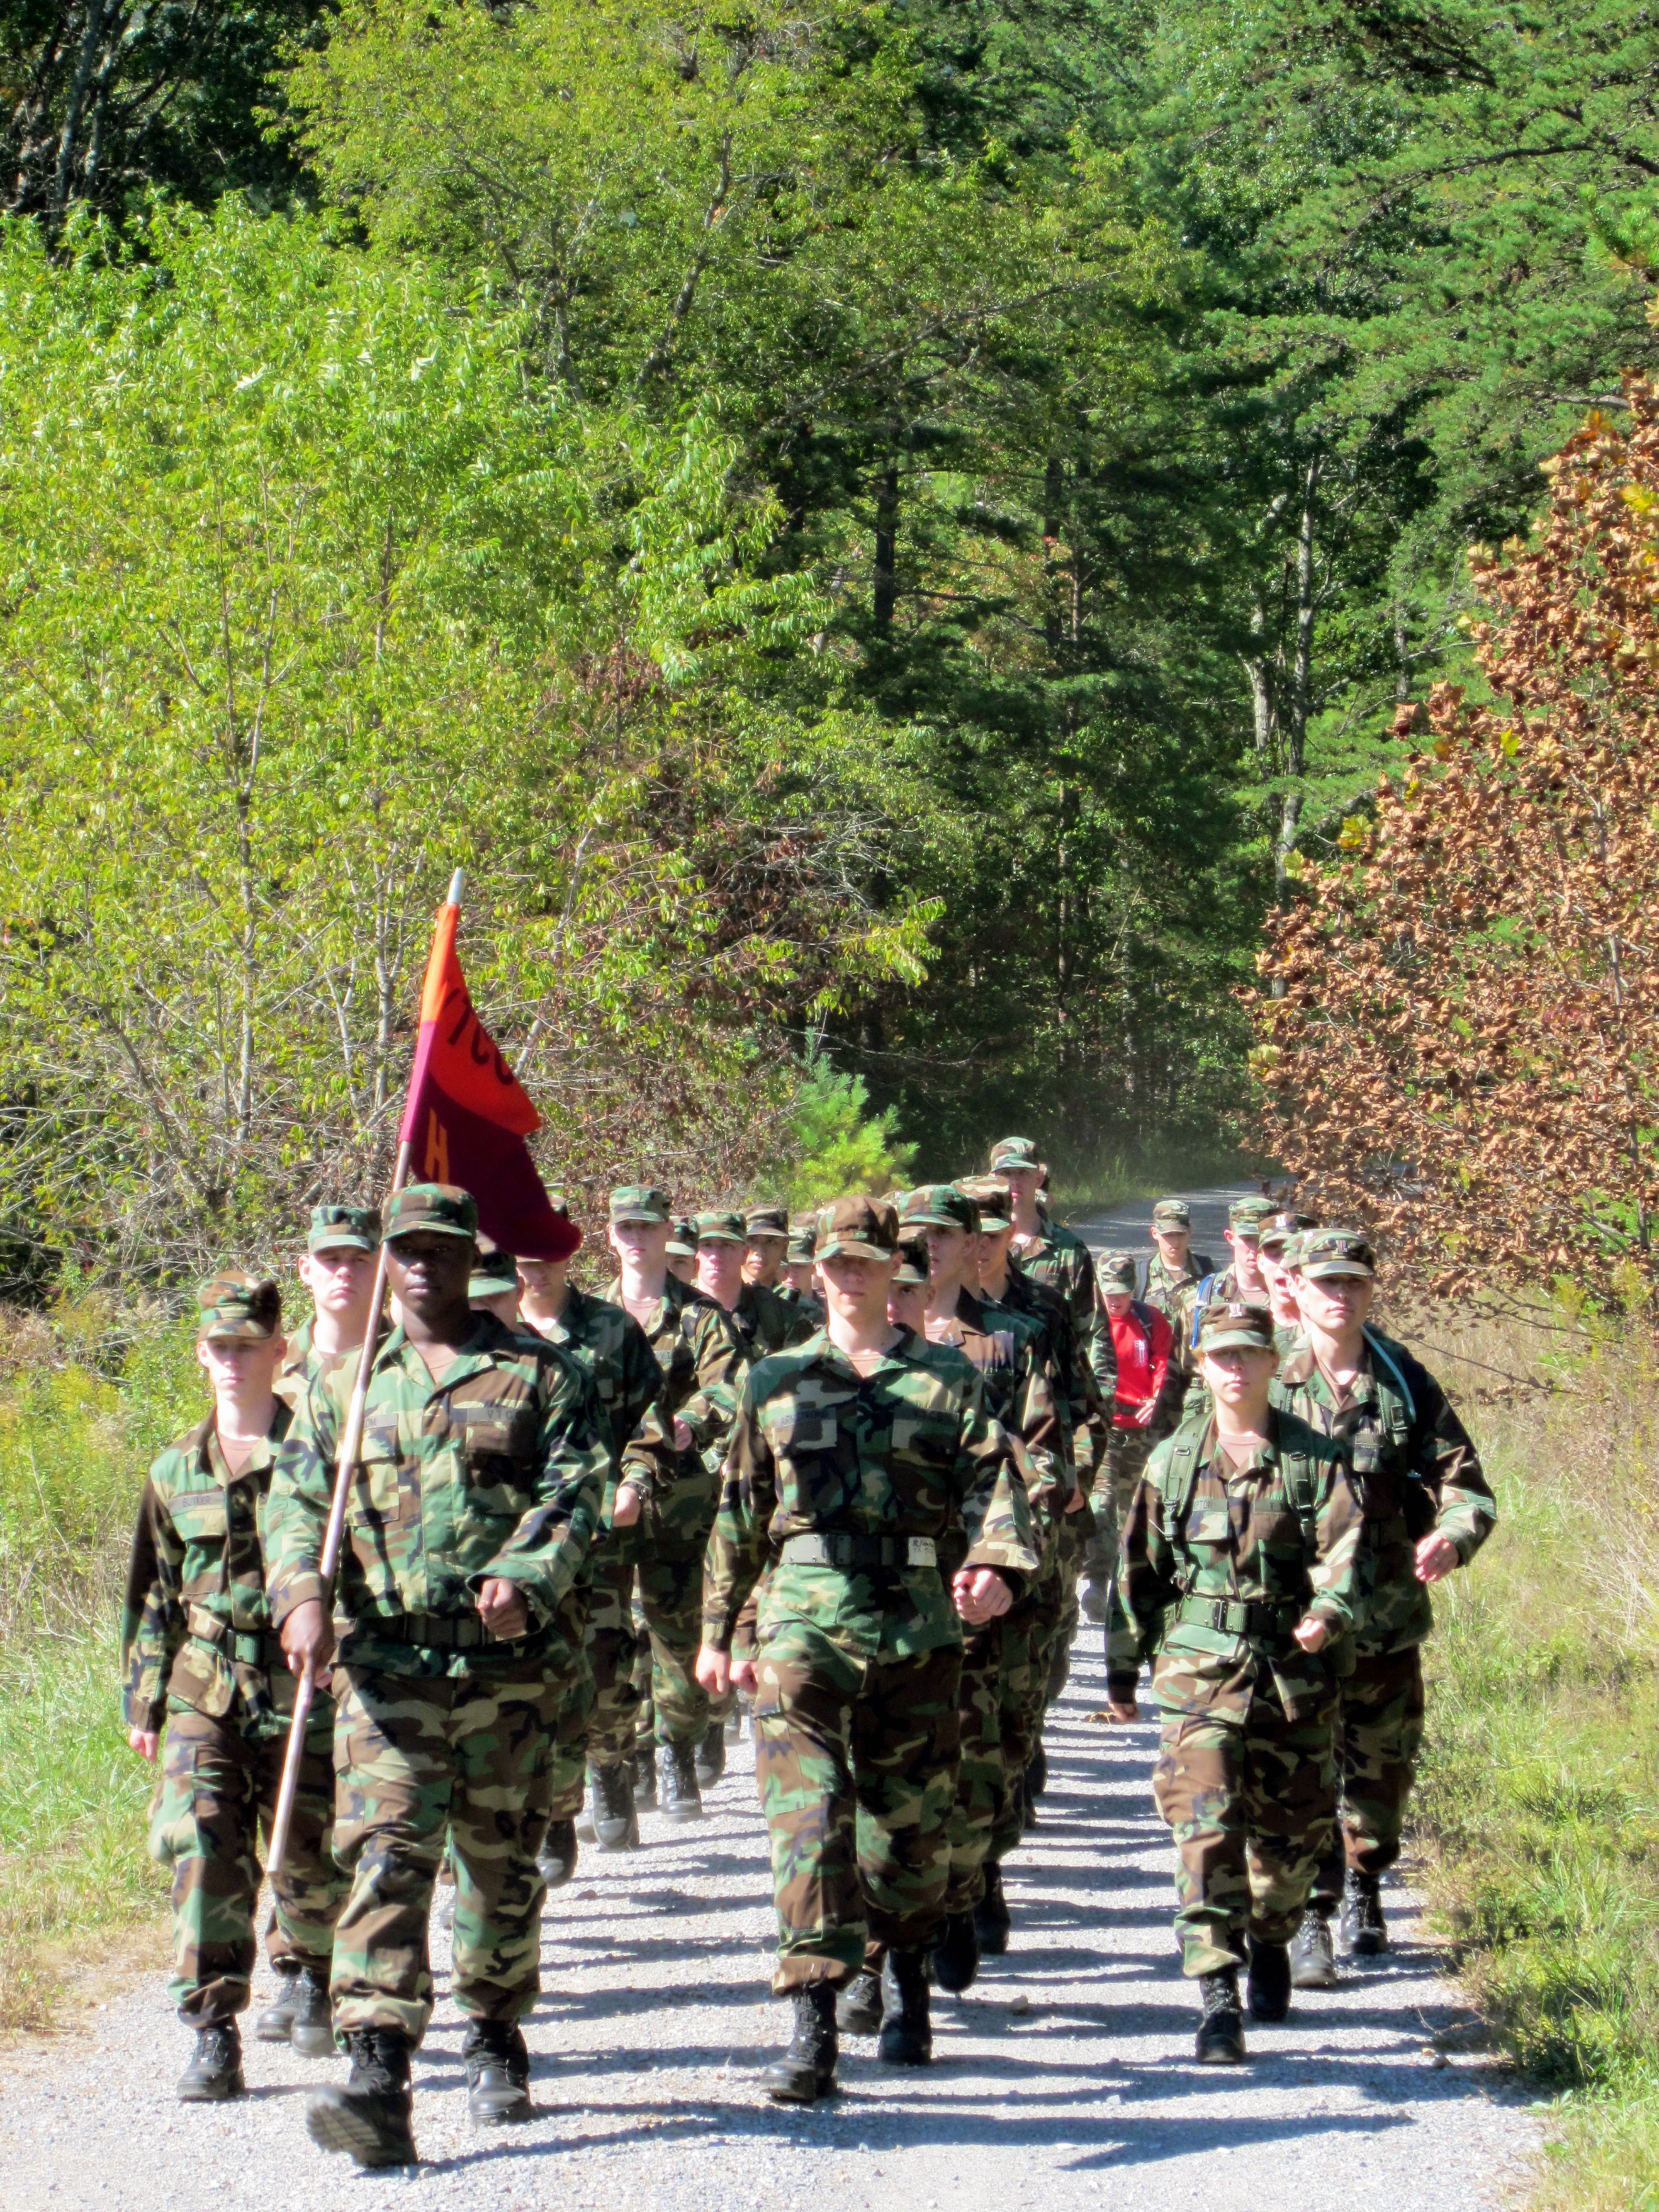 Members of Training Company 2-4 march down the last road during the Fall Caldwell March.